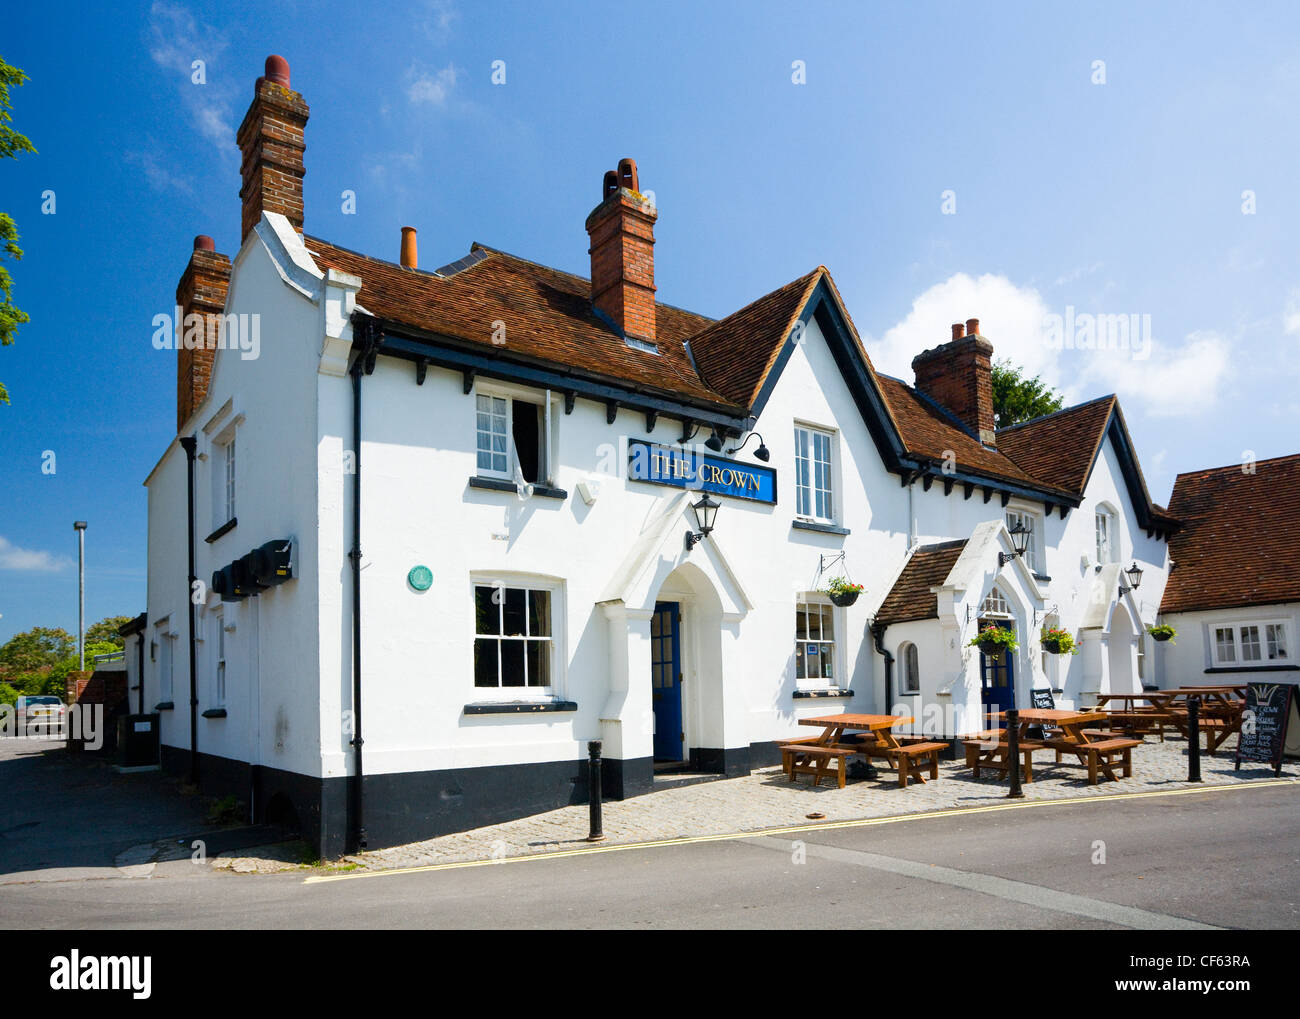 The Crown country pub in the centre of Kingsclere. Stock Photo